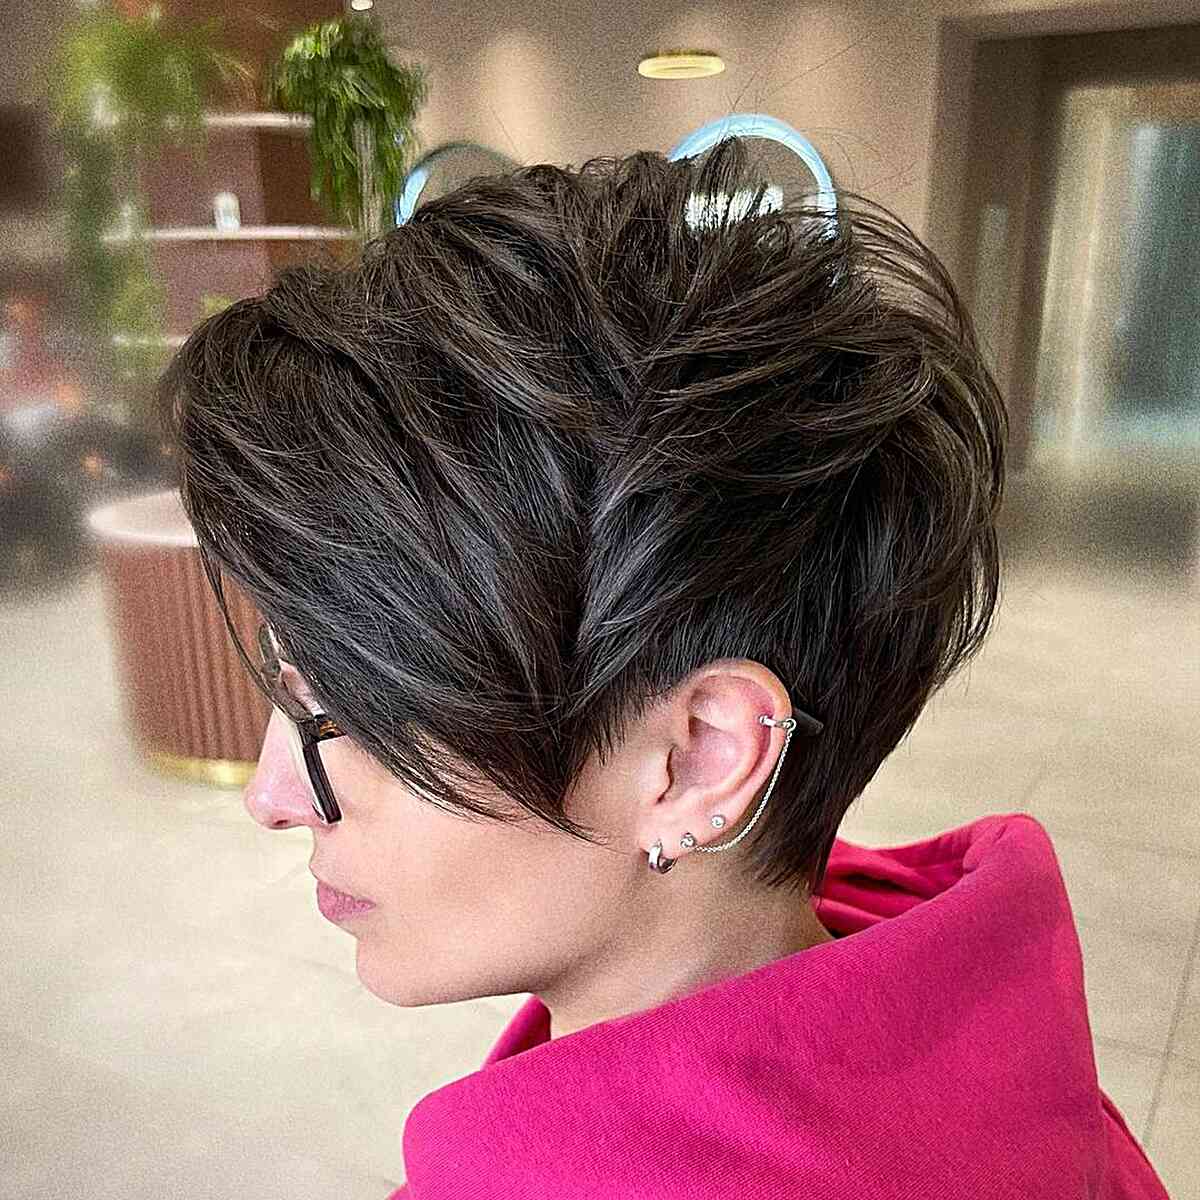 Long Layered Pixie Cut for Short Hair and women with glasses